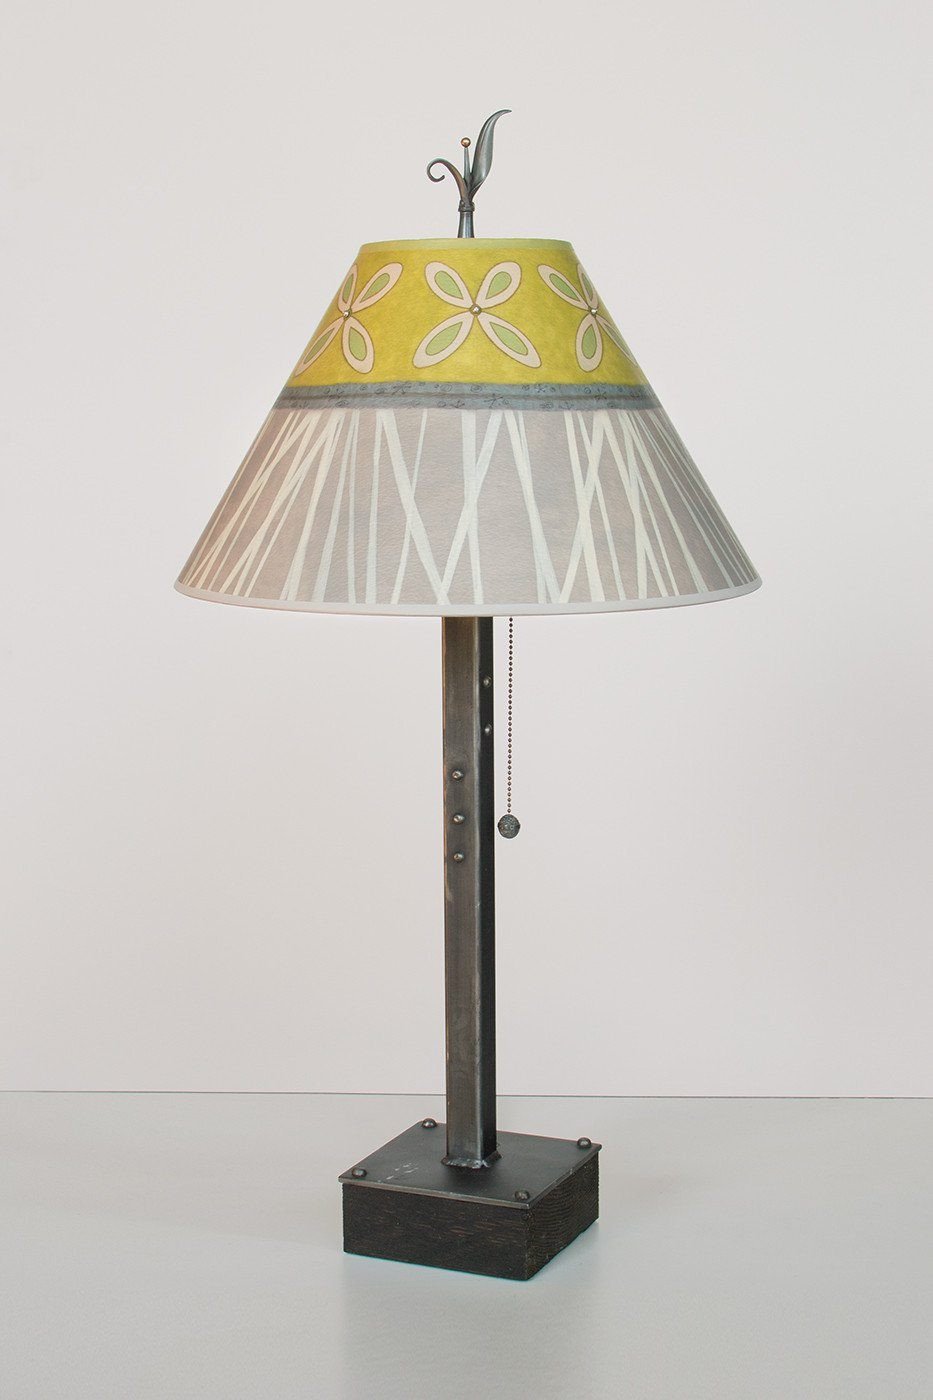 Steel Table Lamp on Wood with Medium Conical Shade in Kiwi - Lit